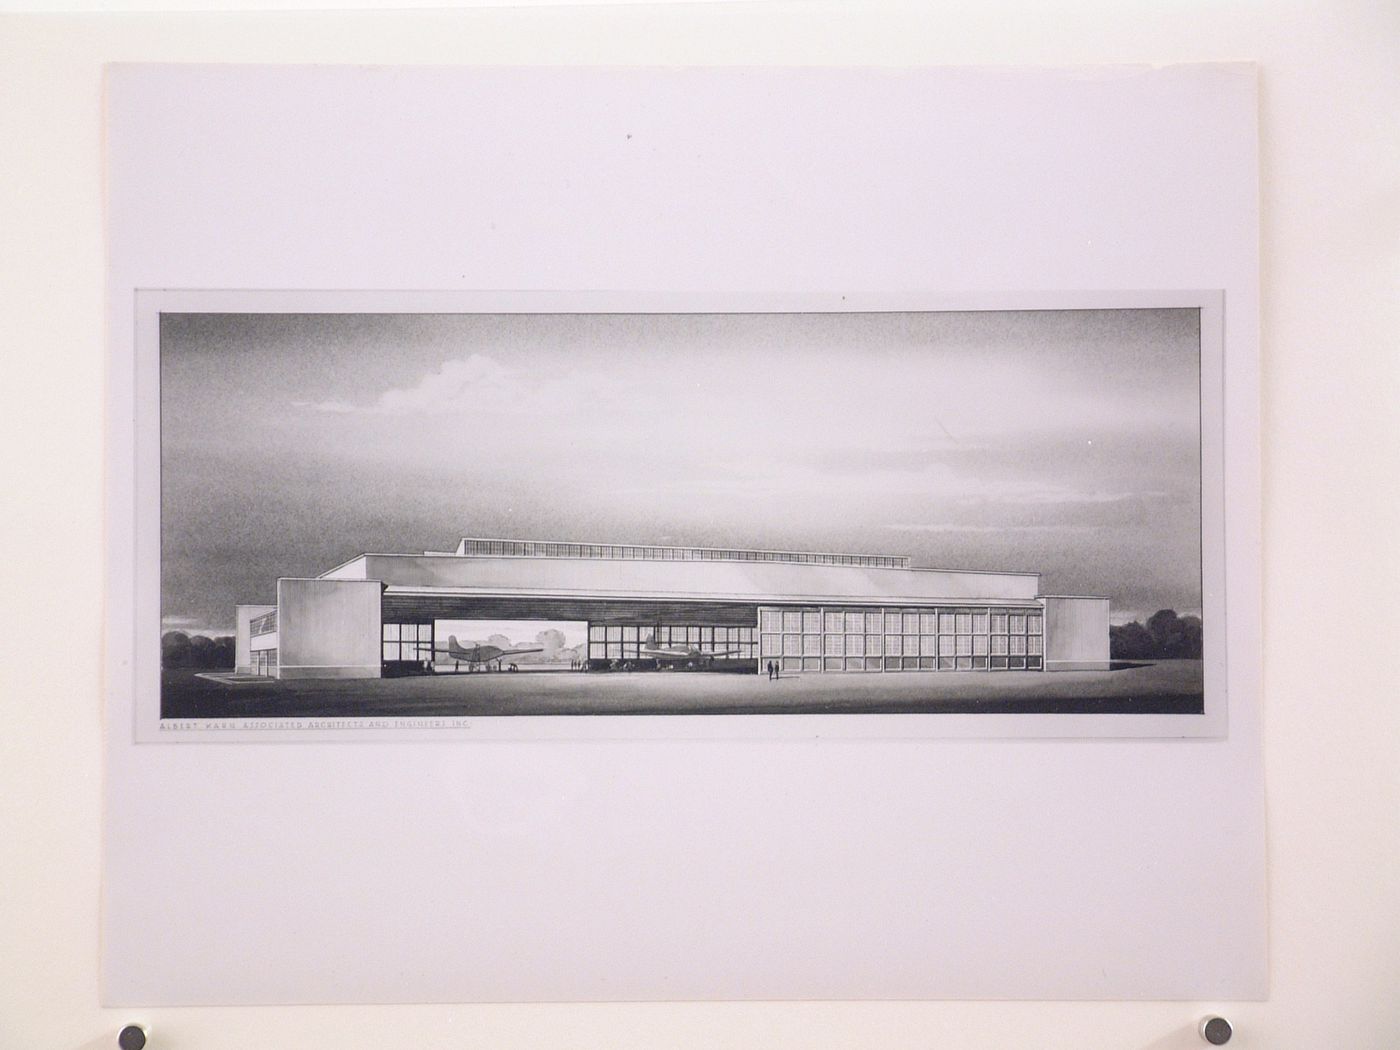 Photograph of a perspective drawing for or of the principal or rear façade of a hangar, United States Atlantic Coast Naval Air Base, Squantum Point, Massachusetts